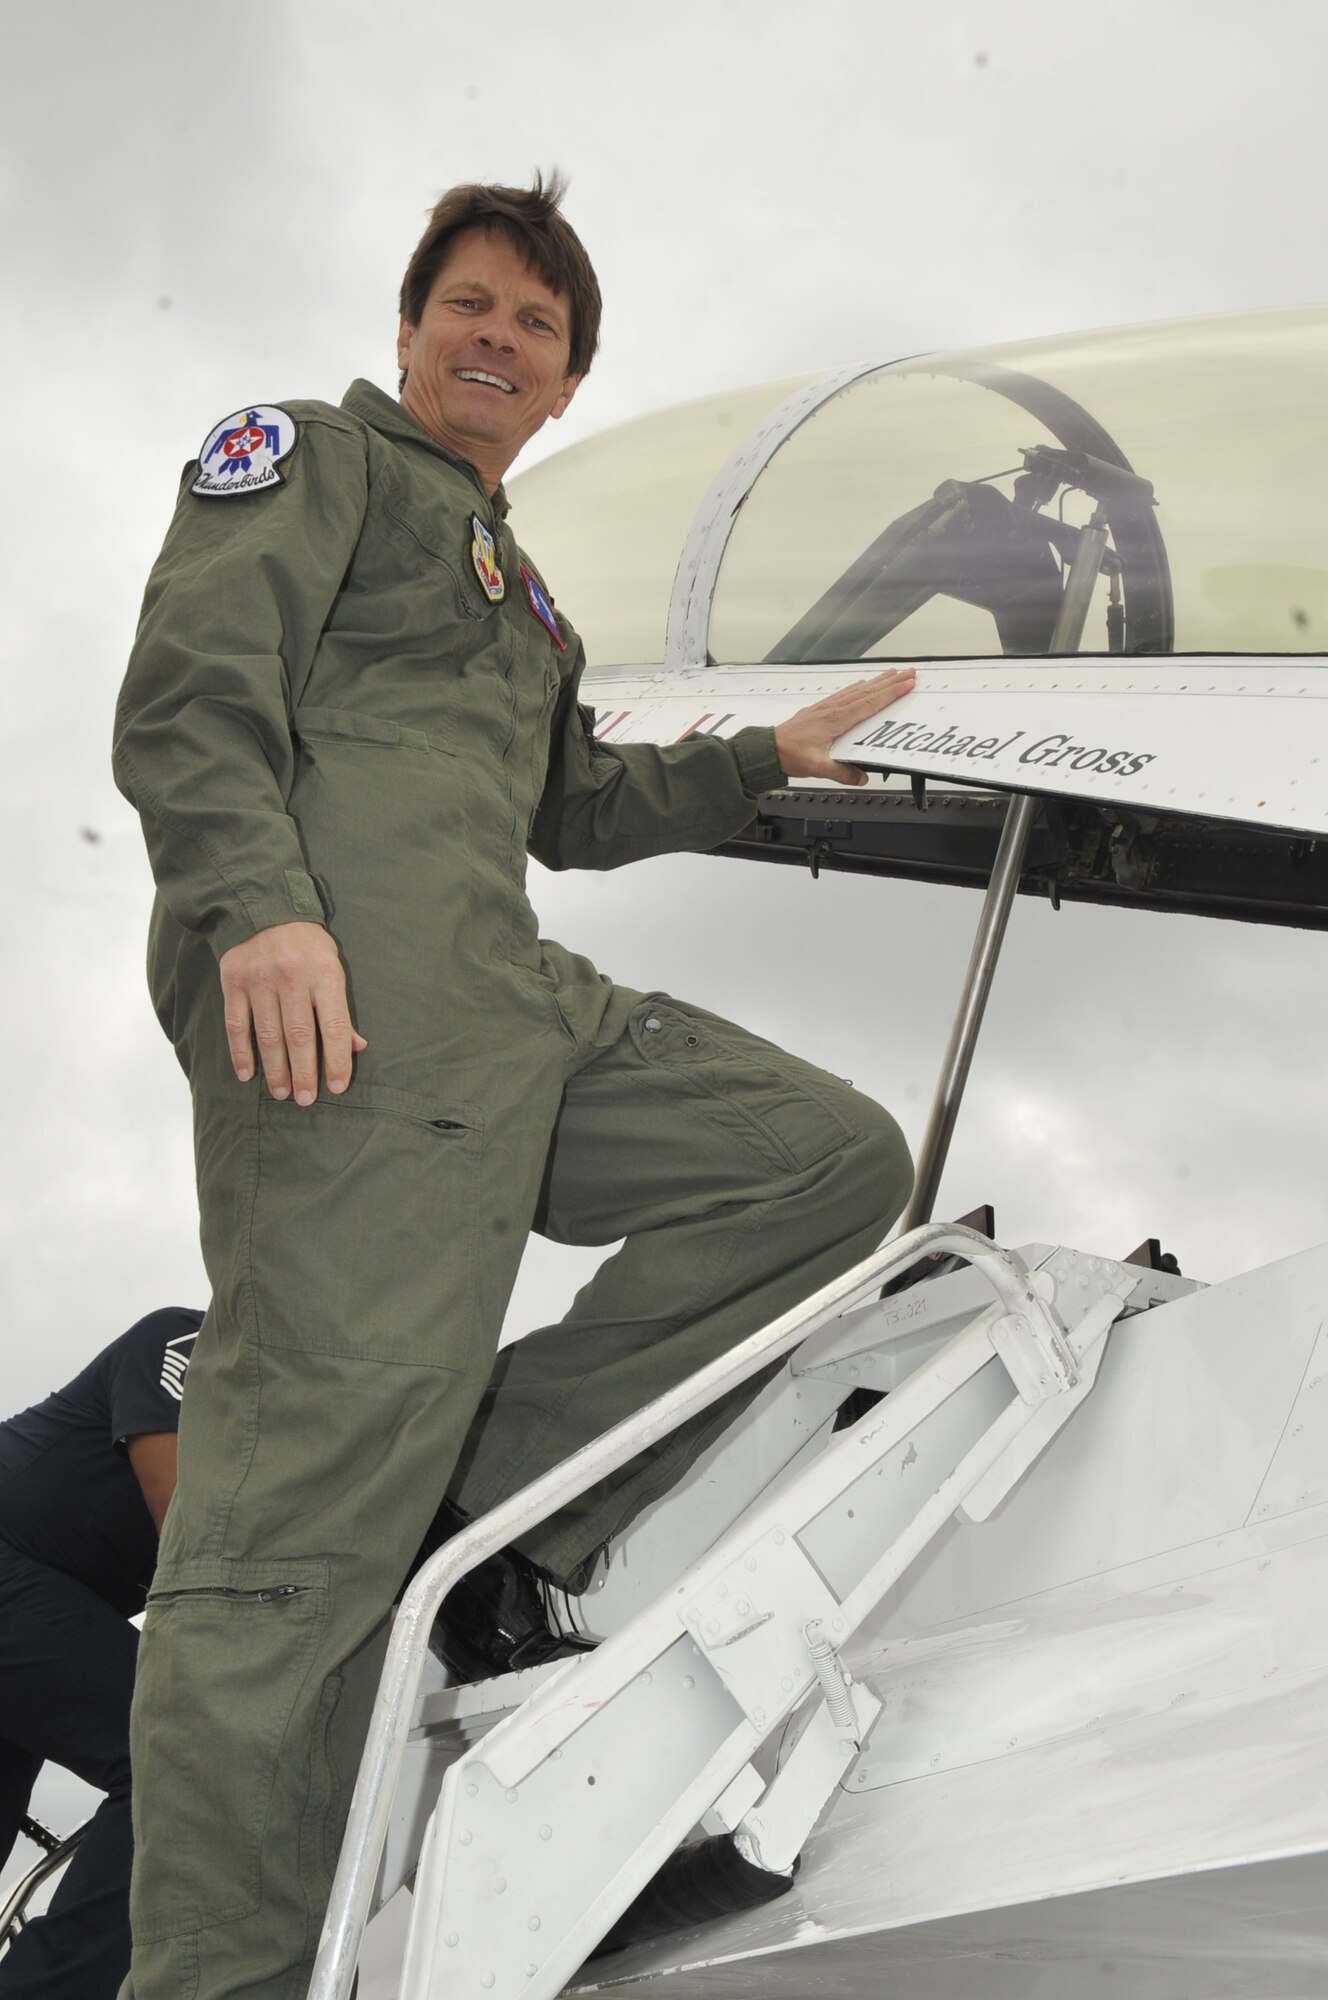 Dr. Michael Gross, an Auburn University Montgomery assistant professor, poses next to an F-16 belonging to the U.S. Air Force Thunderbirds on March 25. Dr. Gross was selected by the Thunderbirds as a Montgomery Hometown Hero and offered a flight with the Air Force Air Demonstration Squadron. (U.S. Air Force photo/Staff Sgt. Richard Rose)